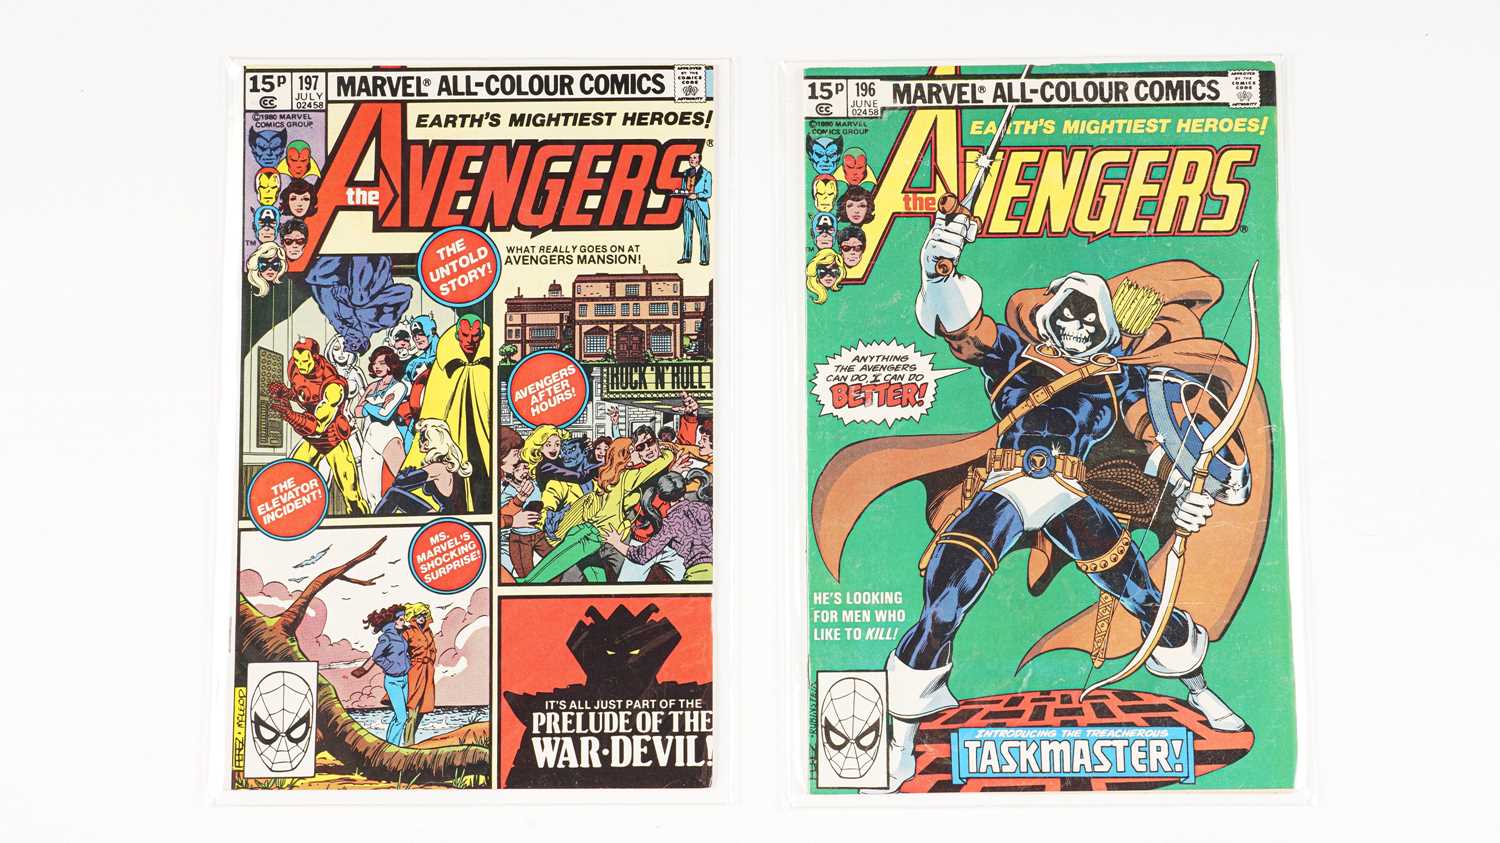 The Avengers by Marvel Comics - Image 3 of 3